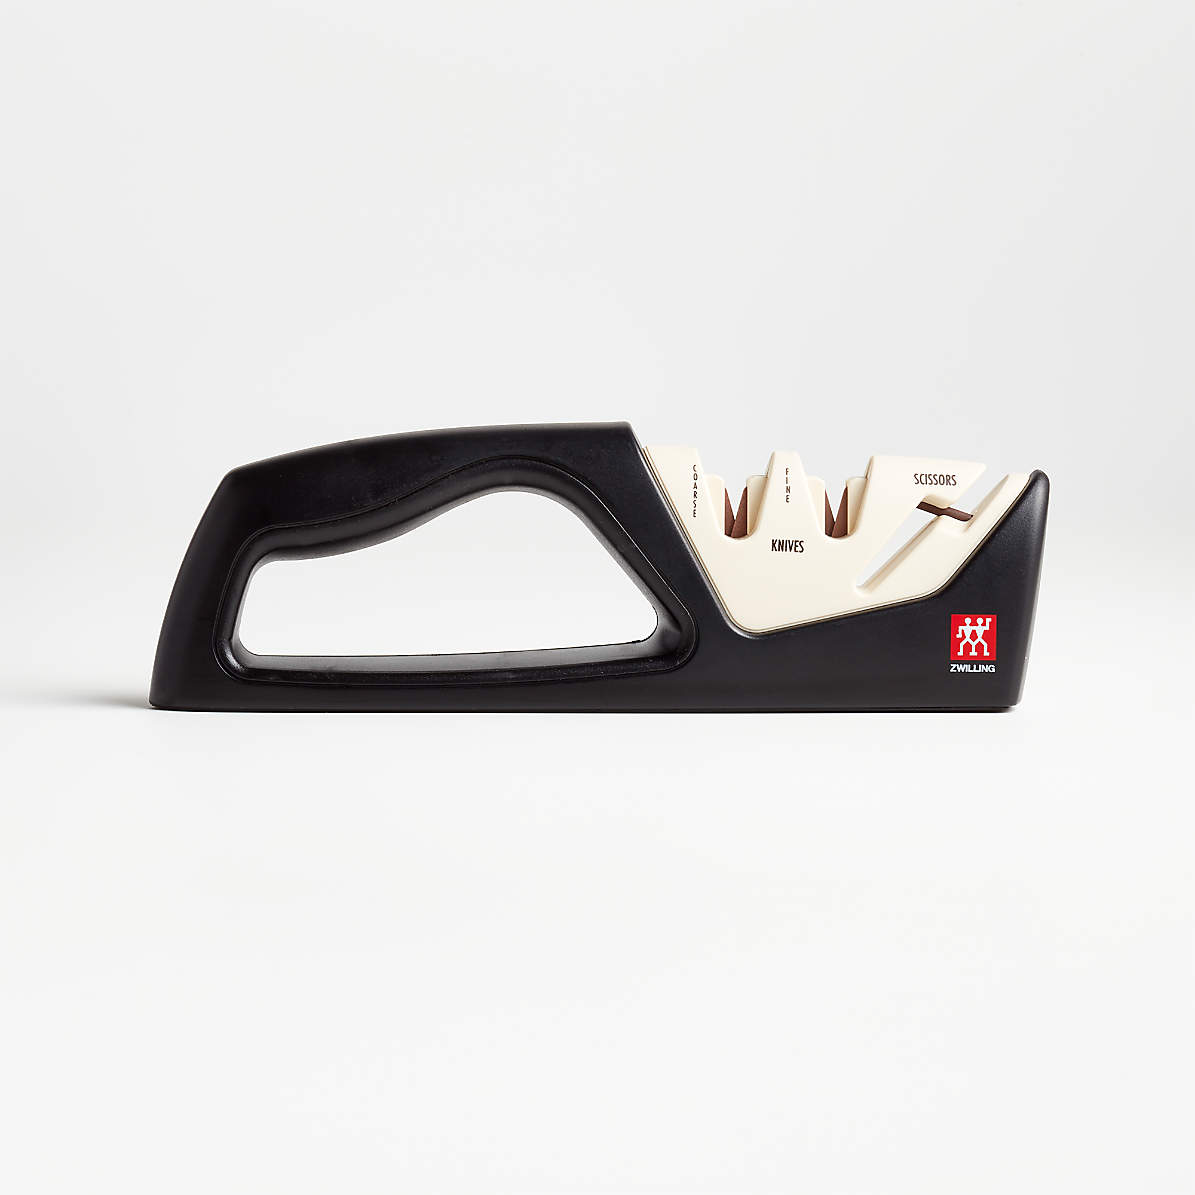 ZWILLING Knife and Scissors Sharpener + Reviews